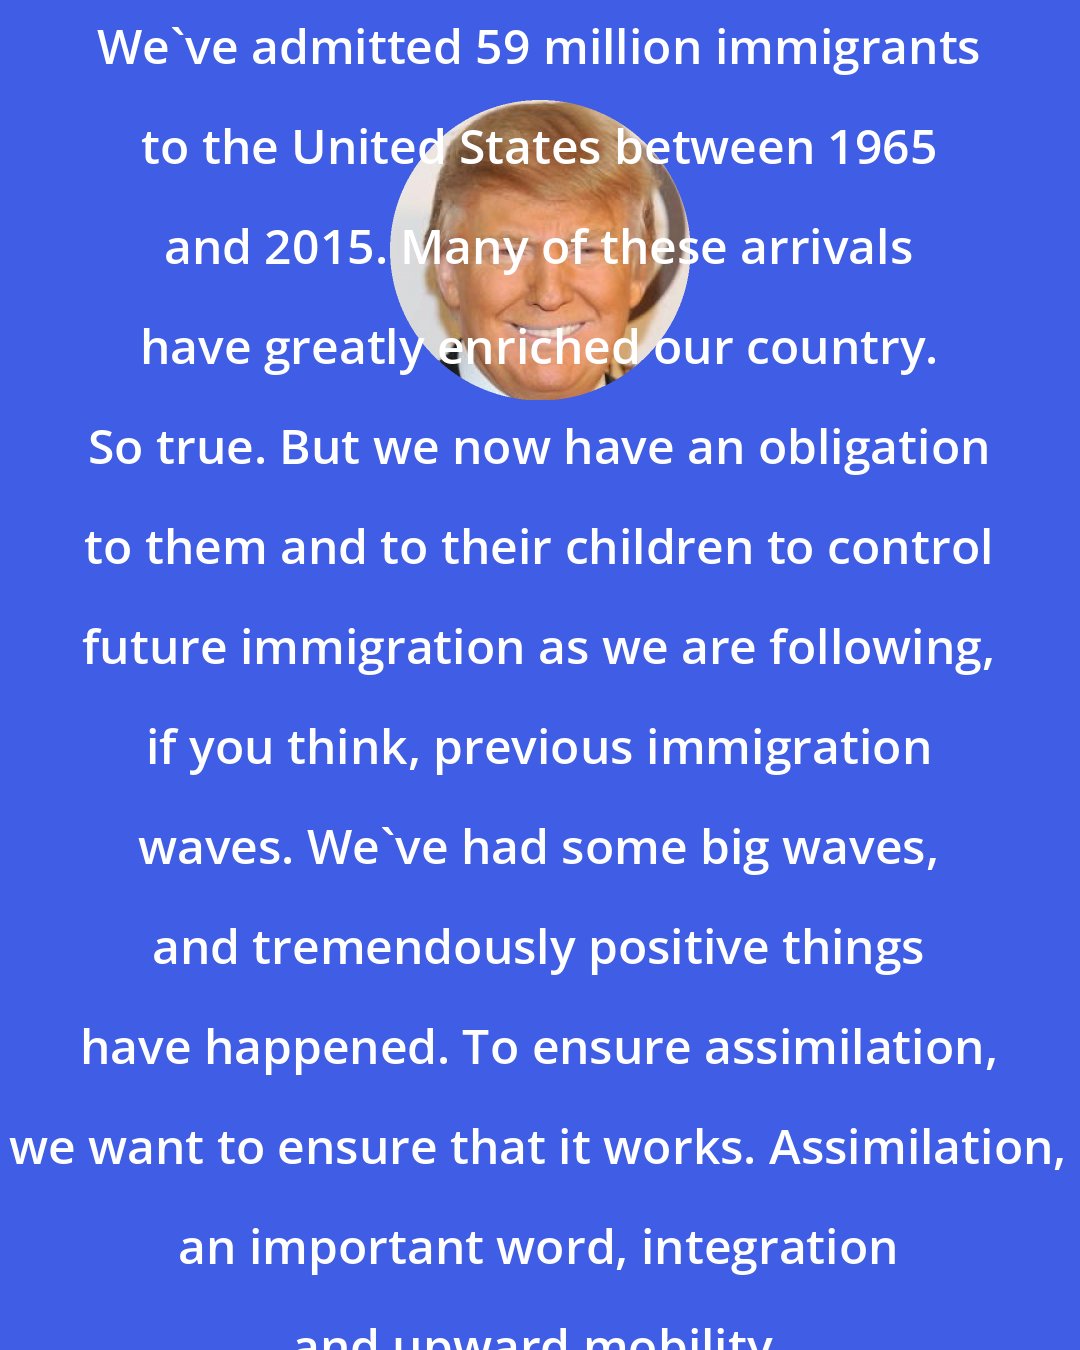 Donald Trump: We`ve admitted 59 million immigrants to the United States between 1965 and 2015. Many of these arrivals have greatly enriched our country. So true. But we now have an obligation to them and to their children to control future immigration as we are following, if you think, previous immigration waves. We`ve had some big waves, and tremendously positive things have happened. To ensure assimilation, we want to ensure that it works. Assimilation, an important word, integration and upward mobility.